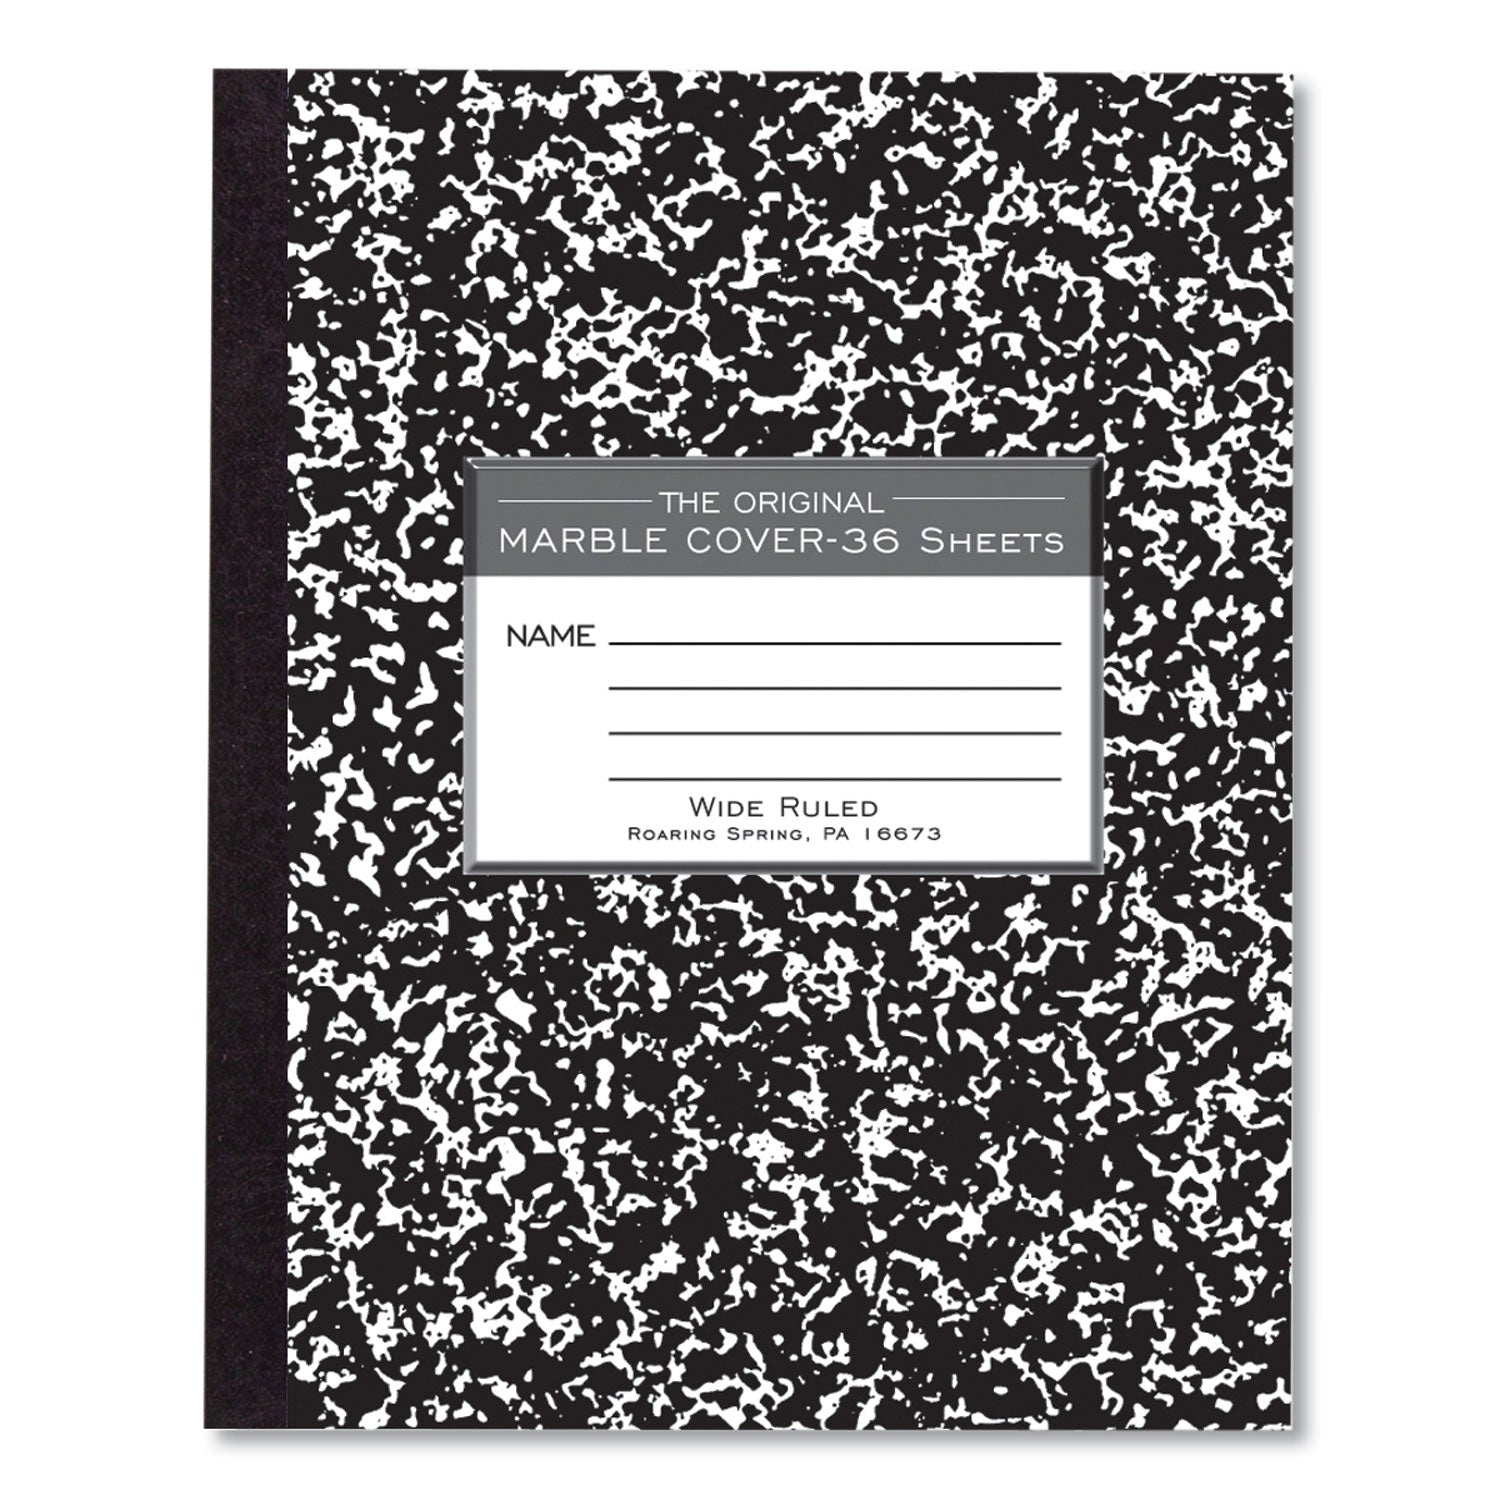 Marble Cover Composition Book, Wide/Legal Rule, Black Marble Cover, (36) 8.5 x 7 Sheets - 